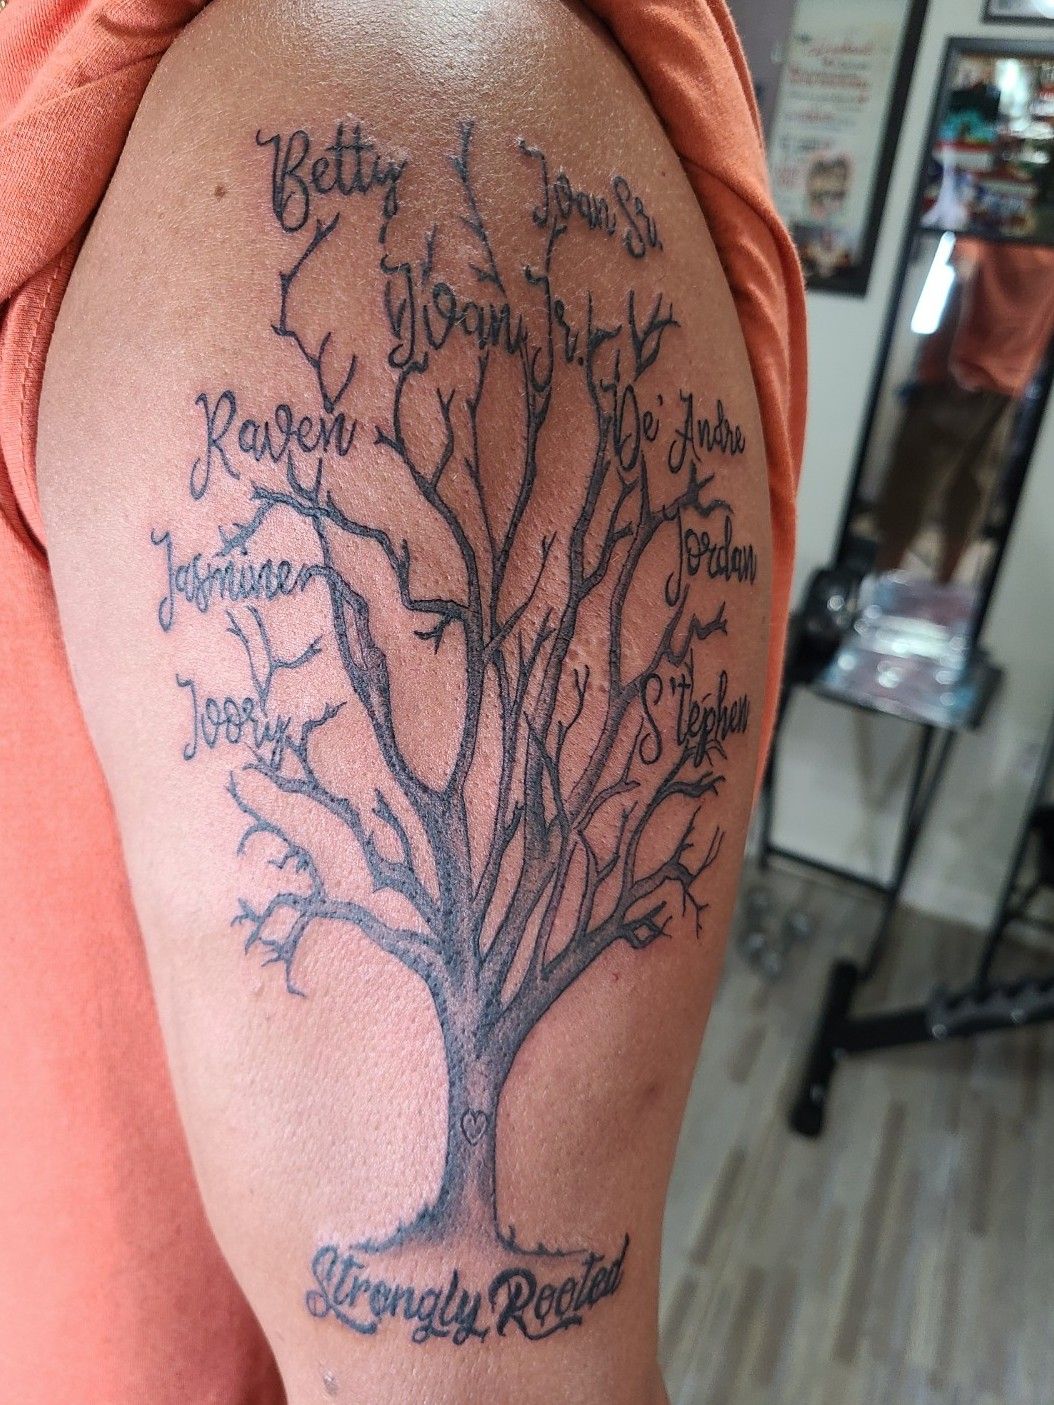 Family Tattoo Ideas Express Your Love with These Beautiful Designs